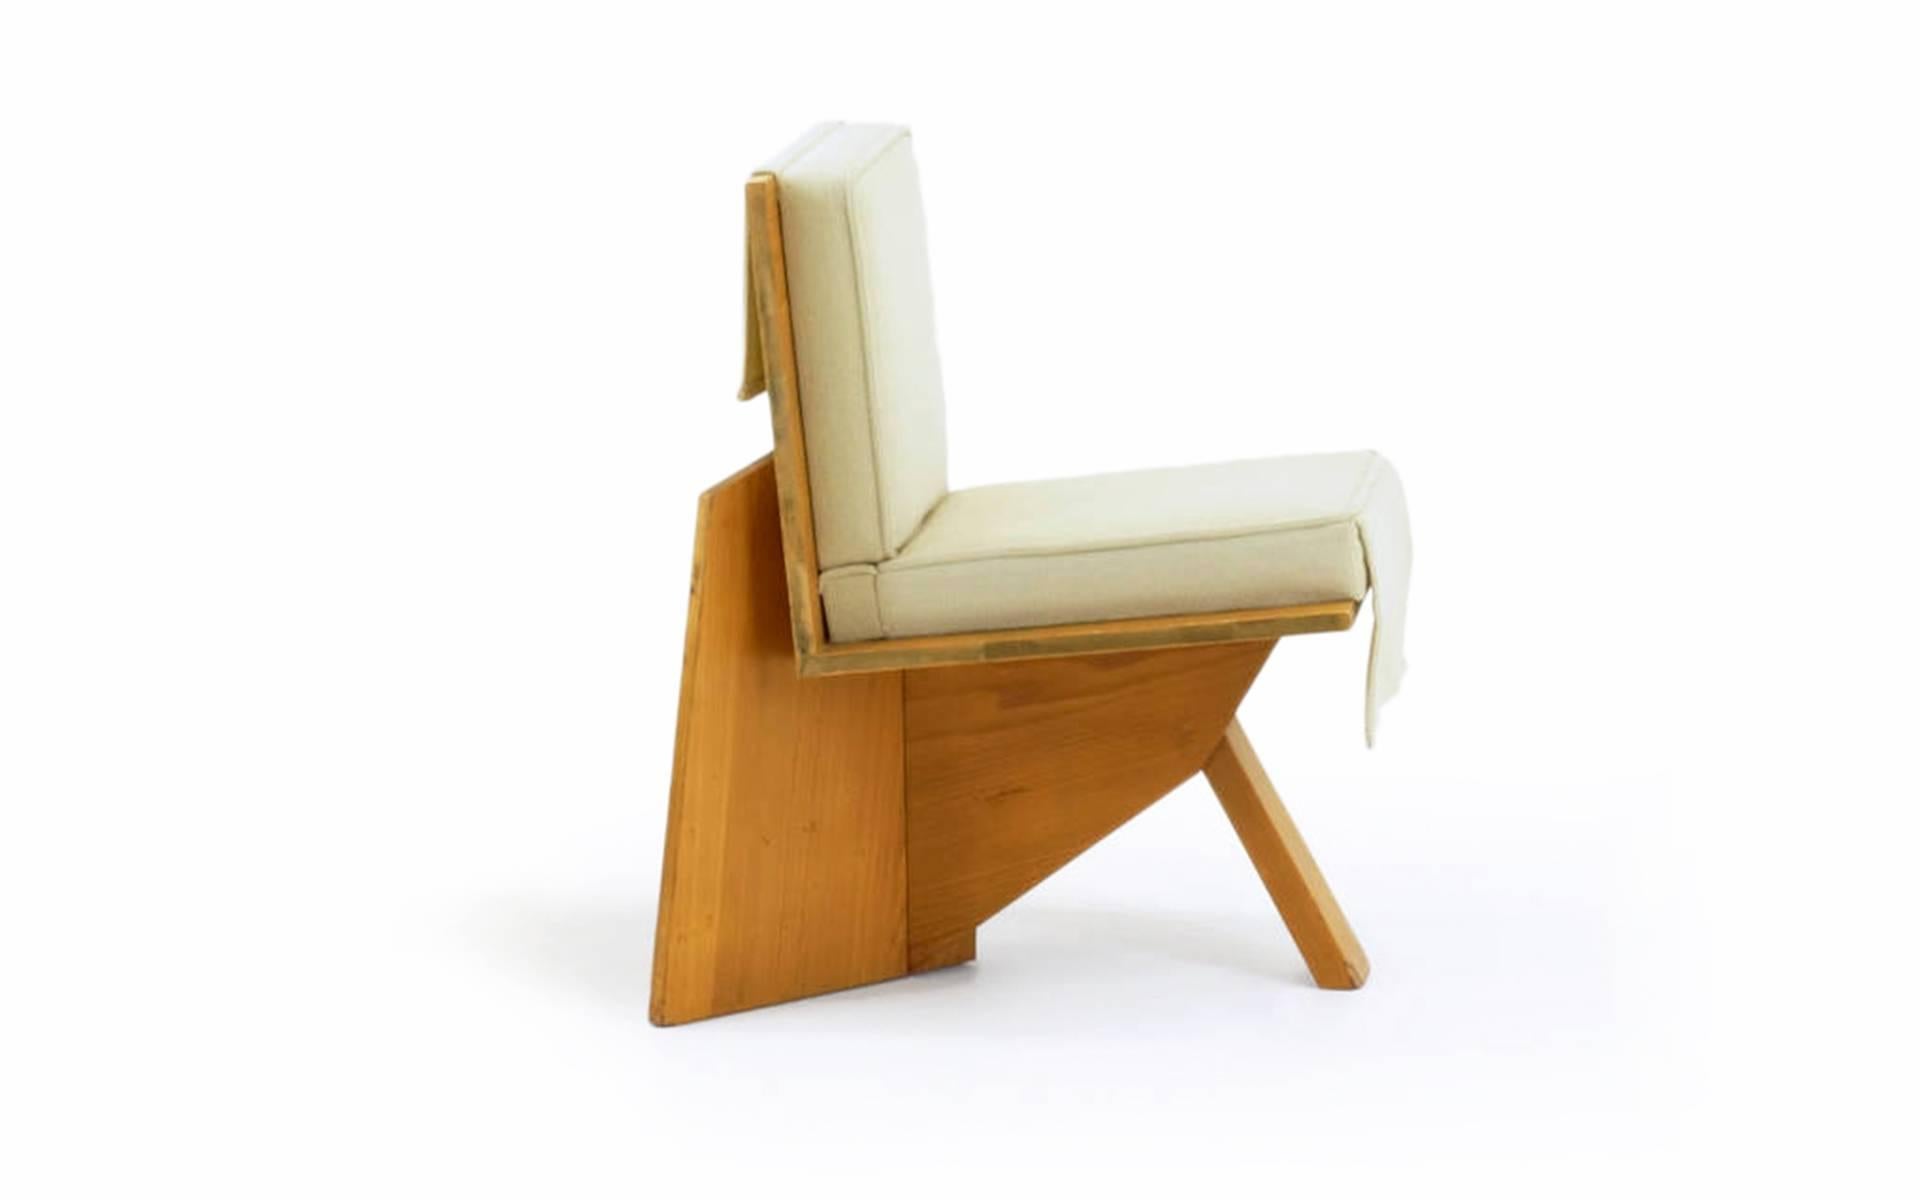 Original Frank Lloyd Wright chair from the Clarence Sondern House, Kansas City, MO. USA, circa 1938. Cypress plywood, upholstery. 
Provenance: Clarence Sondern House, Kansas City, MO Thomas S. Monaghan The Domino's Pizza Collection Christie's, New